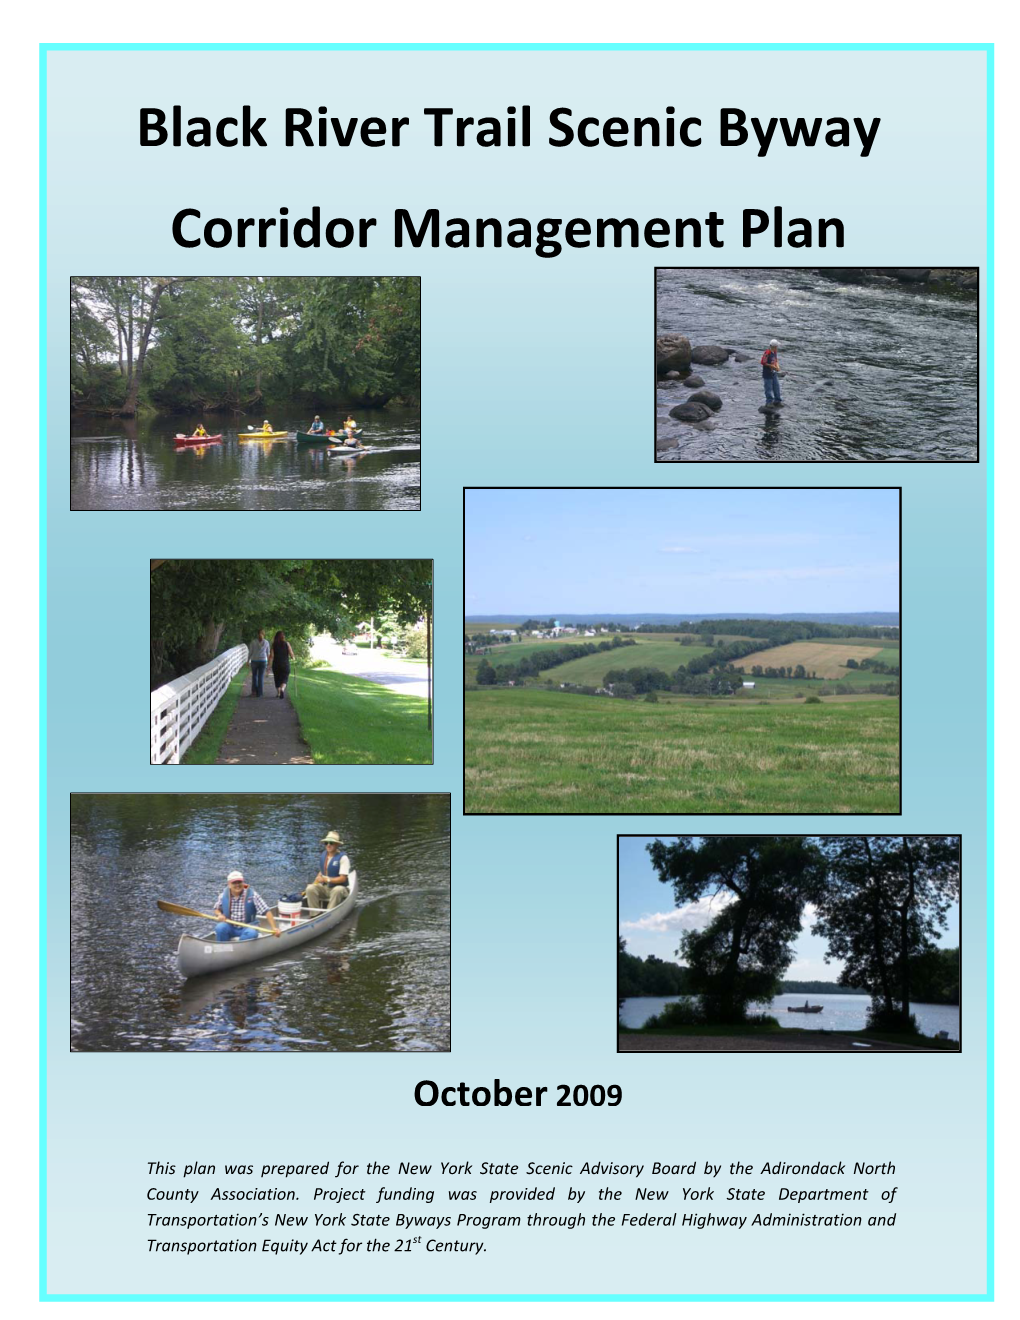 Black River Trail Scenic Byway Corridor Management Plan